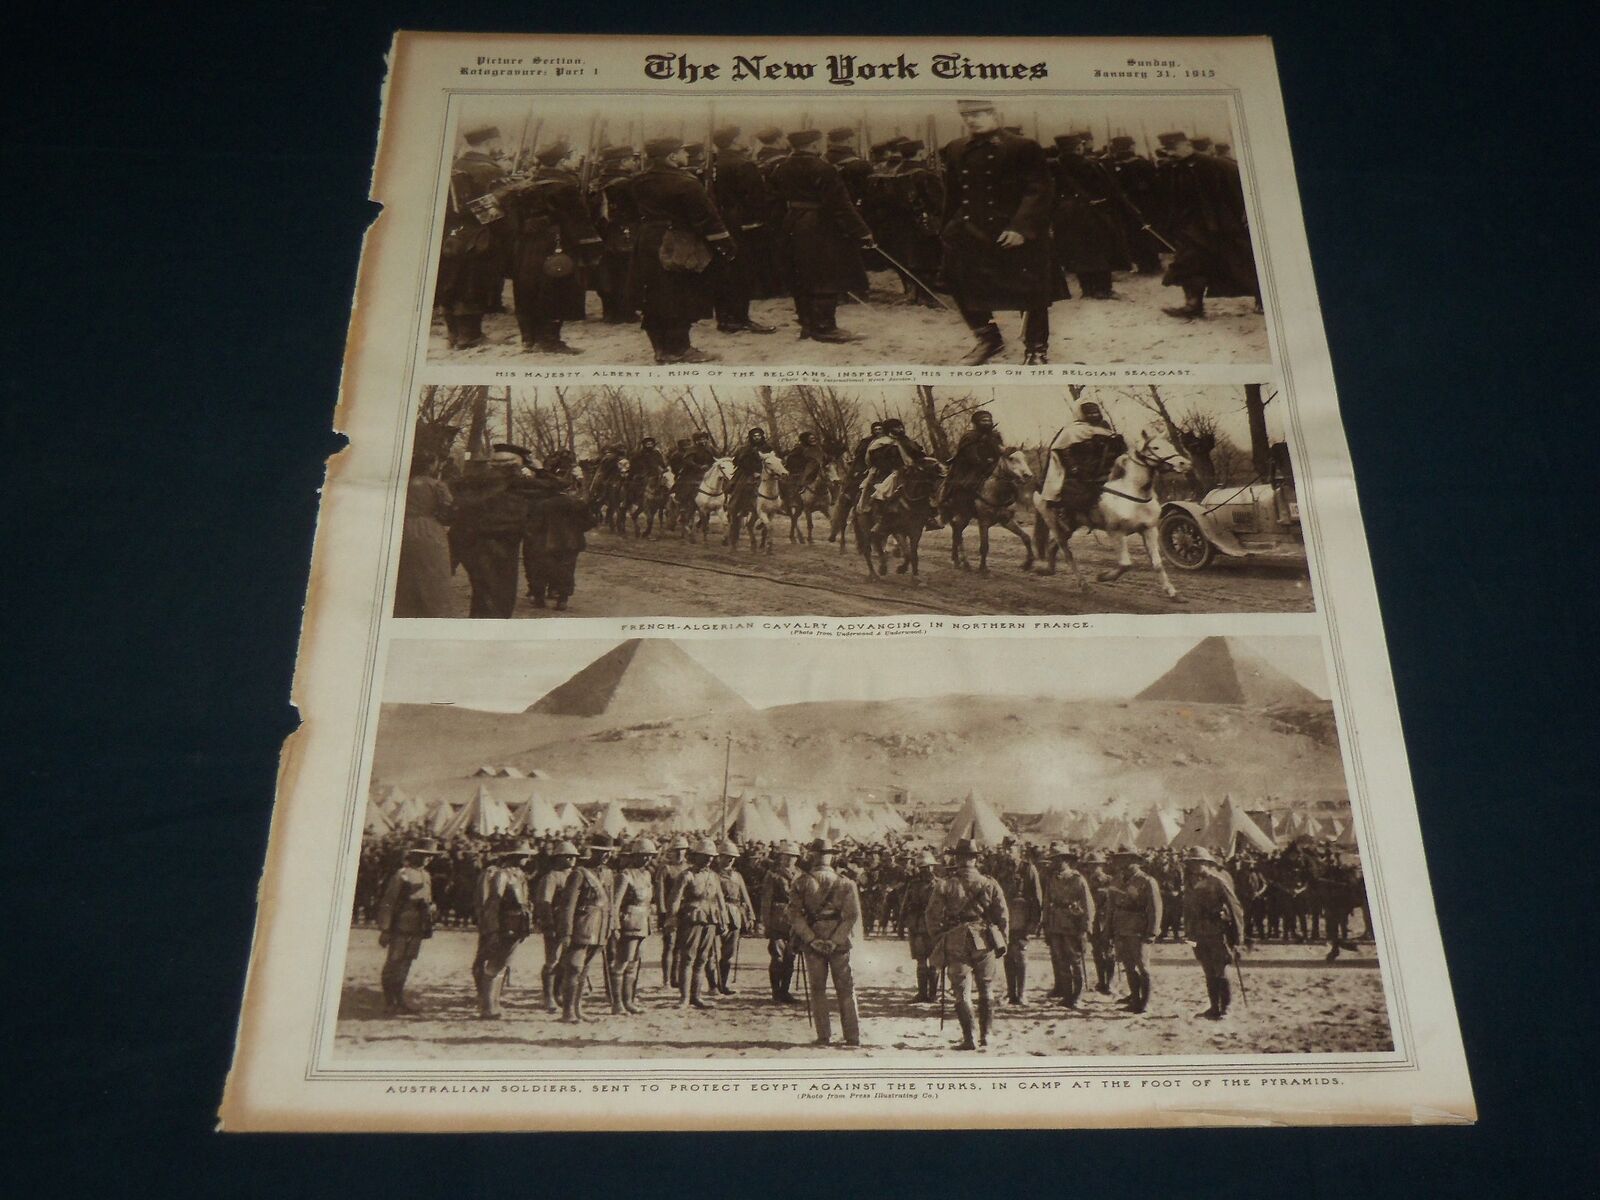 1915 JANUARY 31 NEW YORK TIMES PICTURE SECTION - AUSTRALIAN SOLDIERS - NT 8944